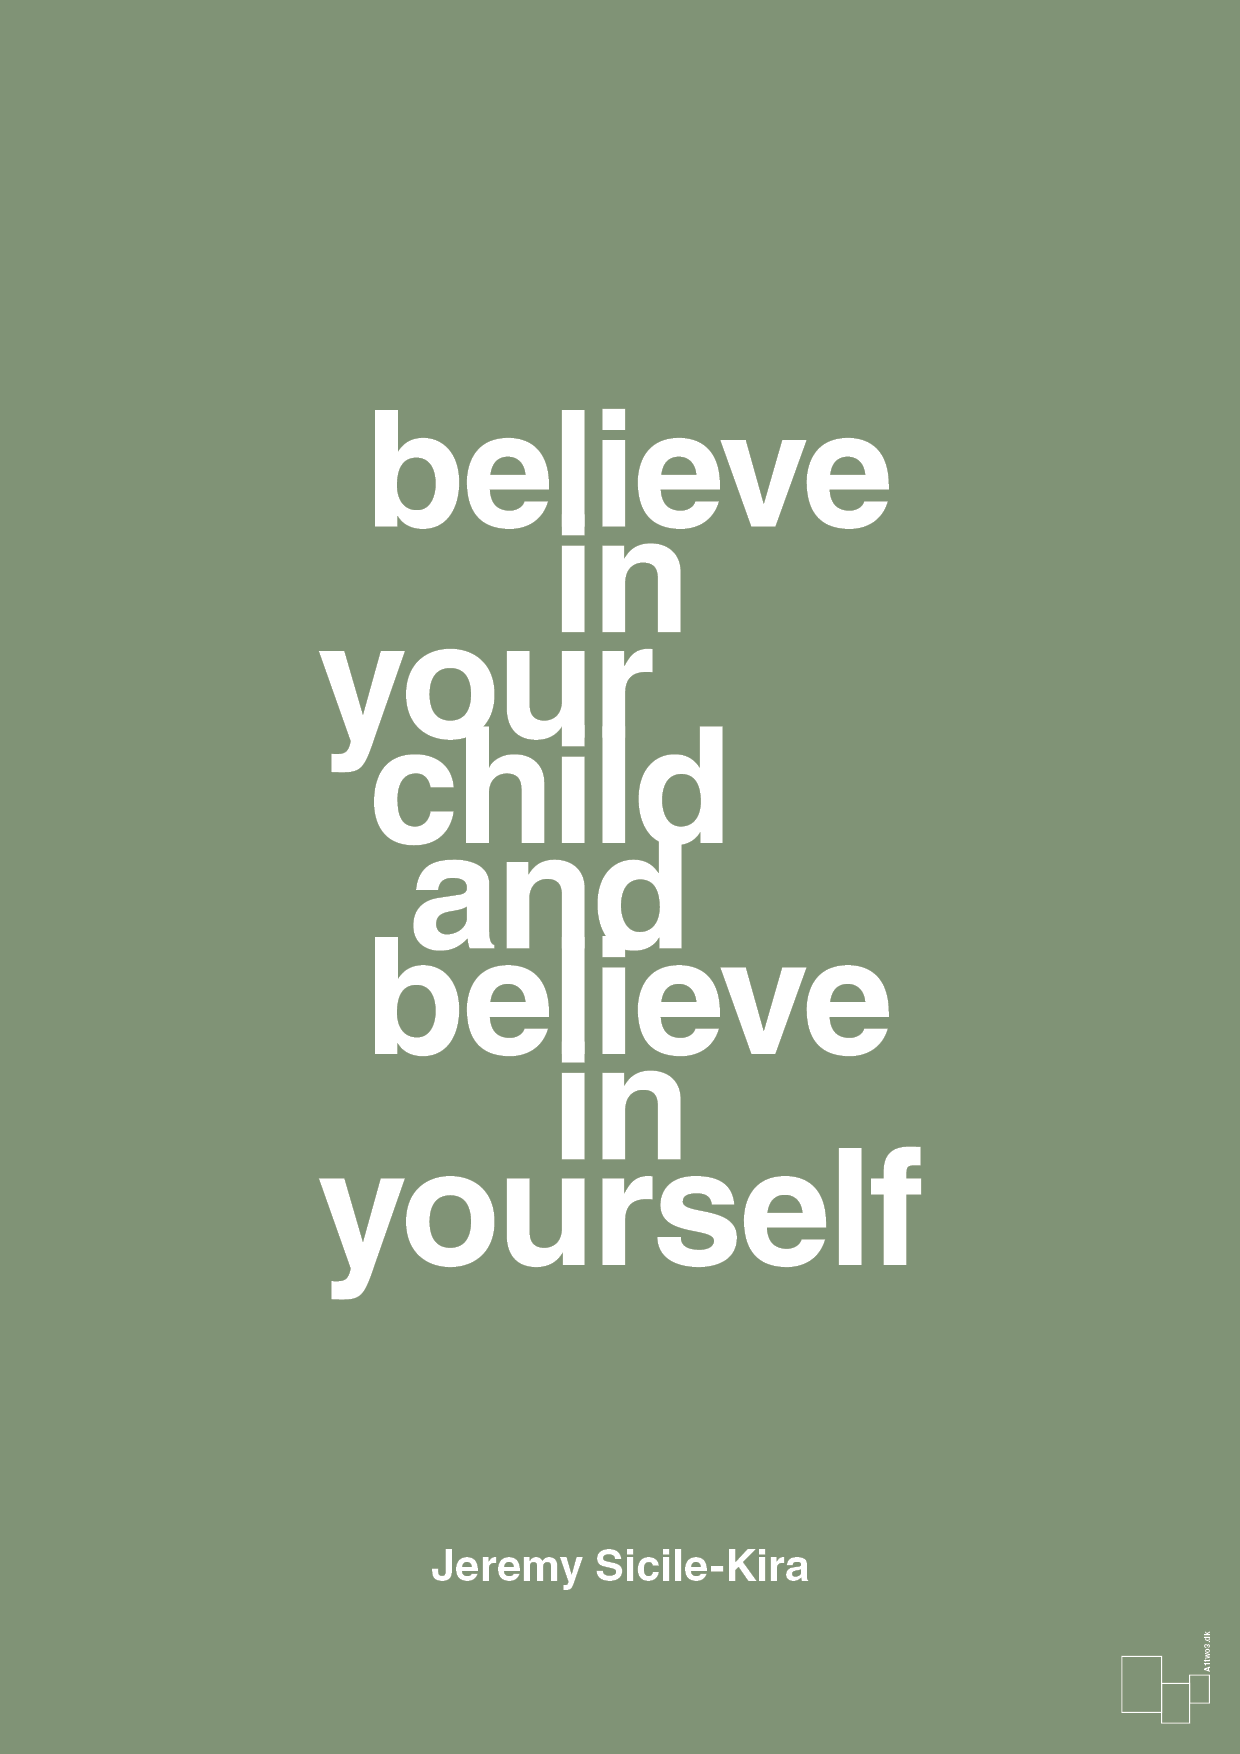 believe in your child and believe in yourself - Plakat med Samfund i Jade